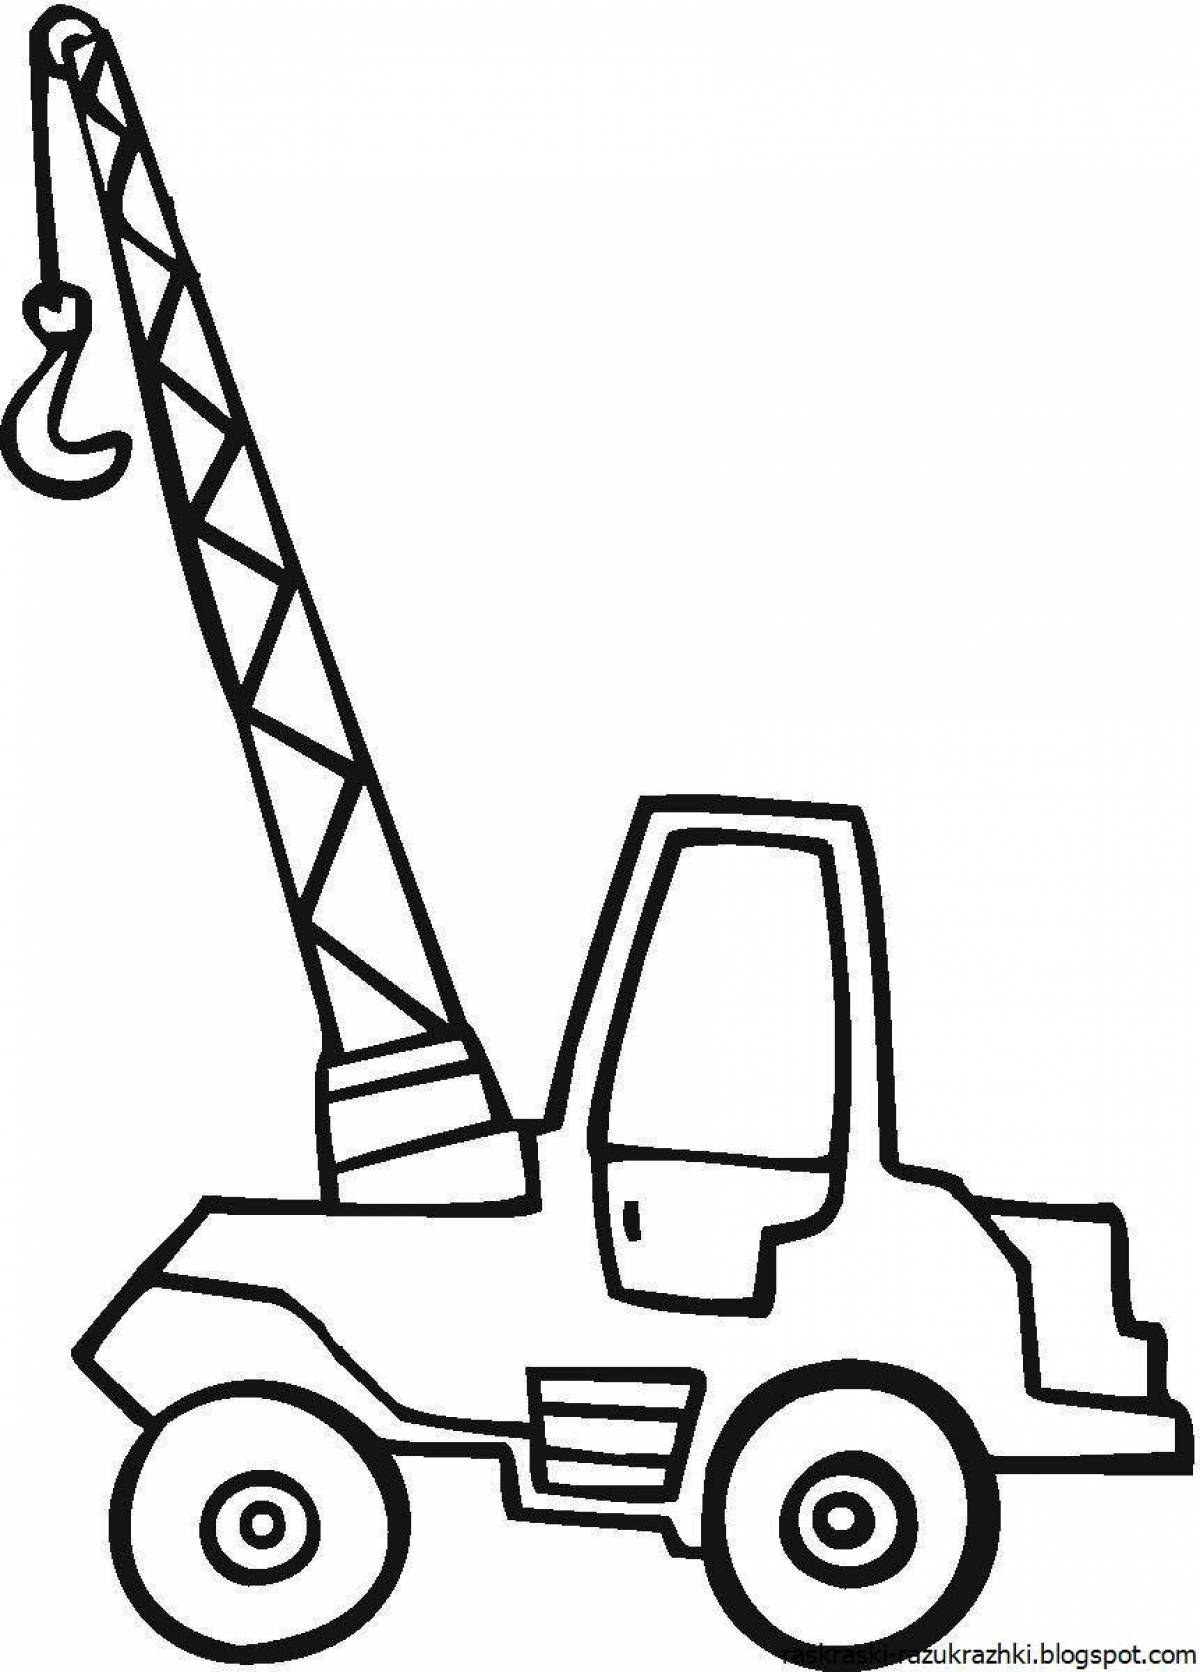 Awesome crane coloring page